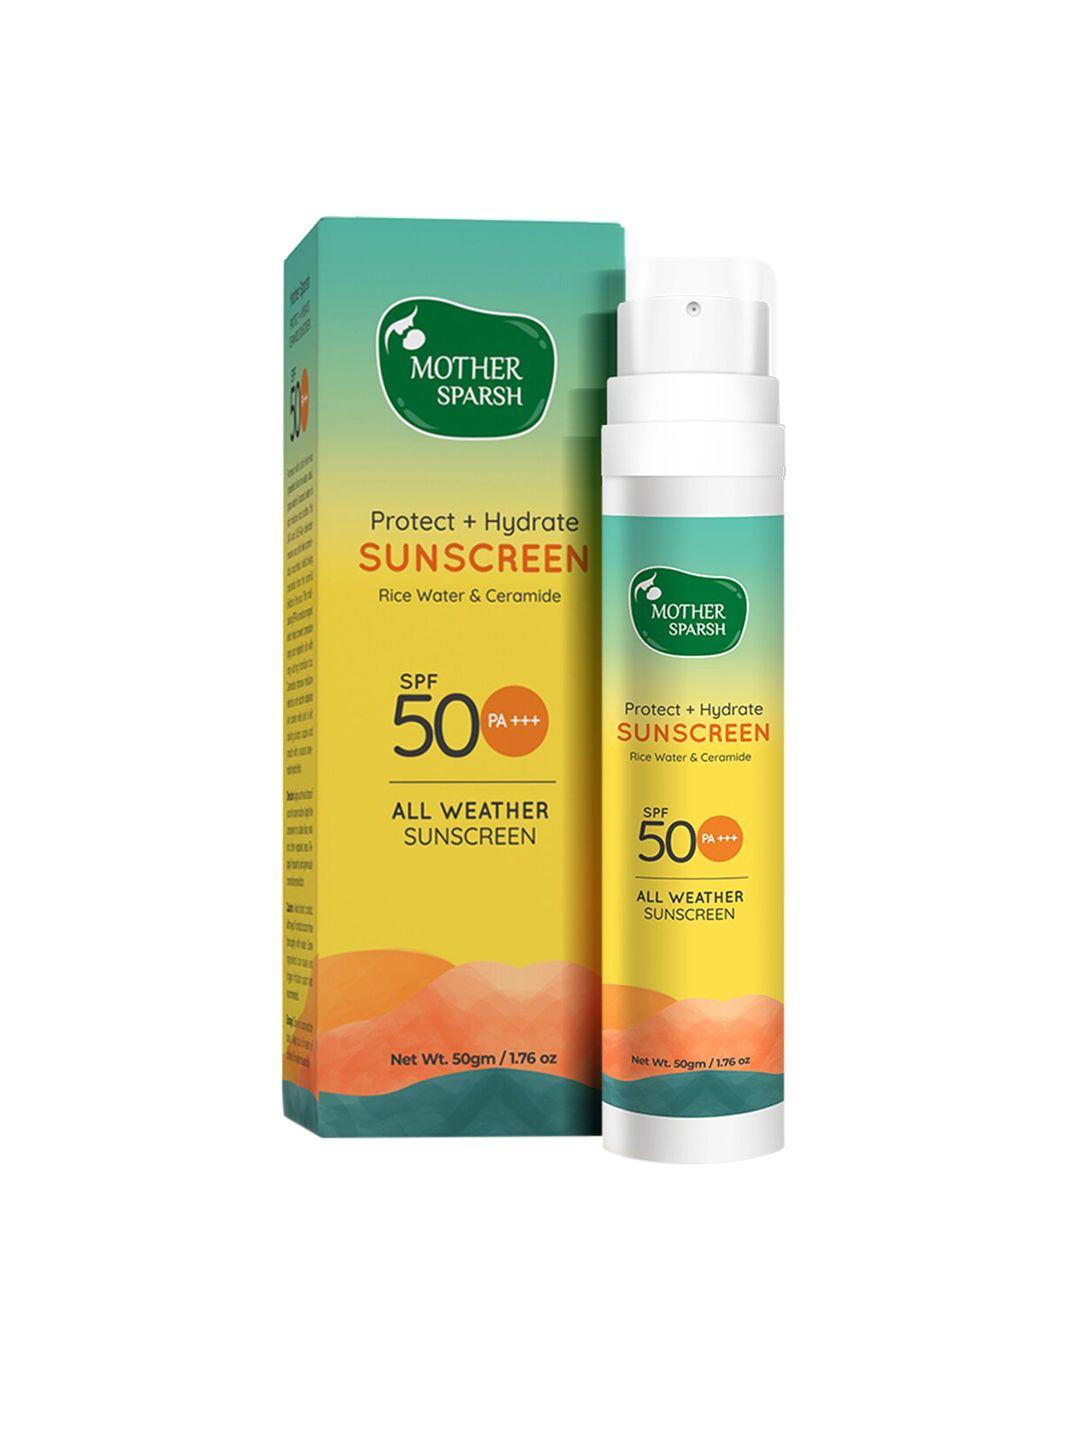 mother sparsh all weather sunscreen spf50 pa+++ with rice water & ceramide - 50g